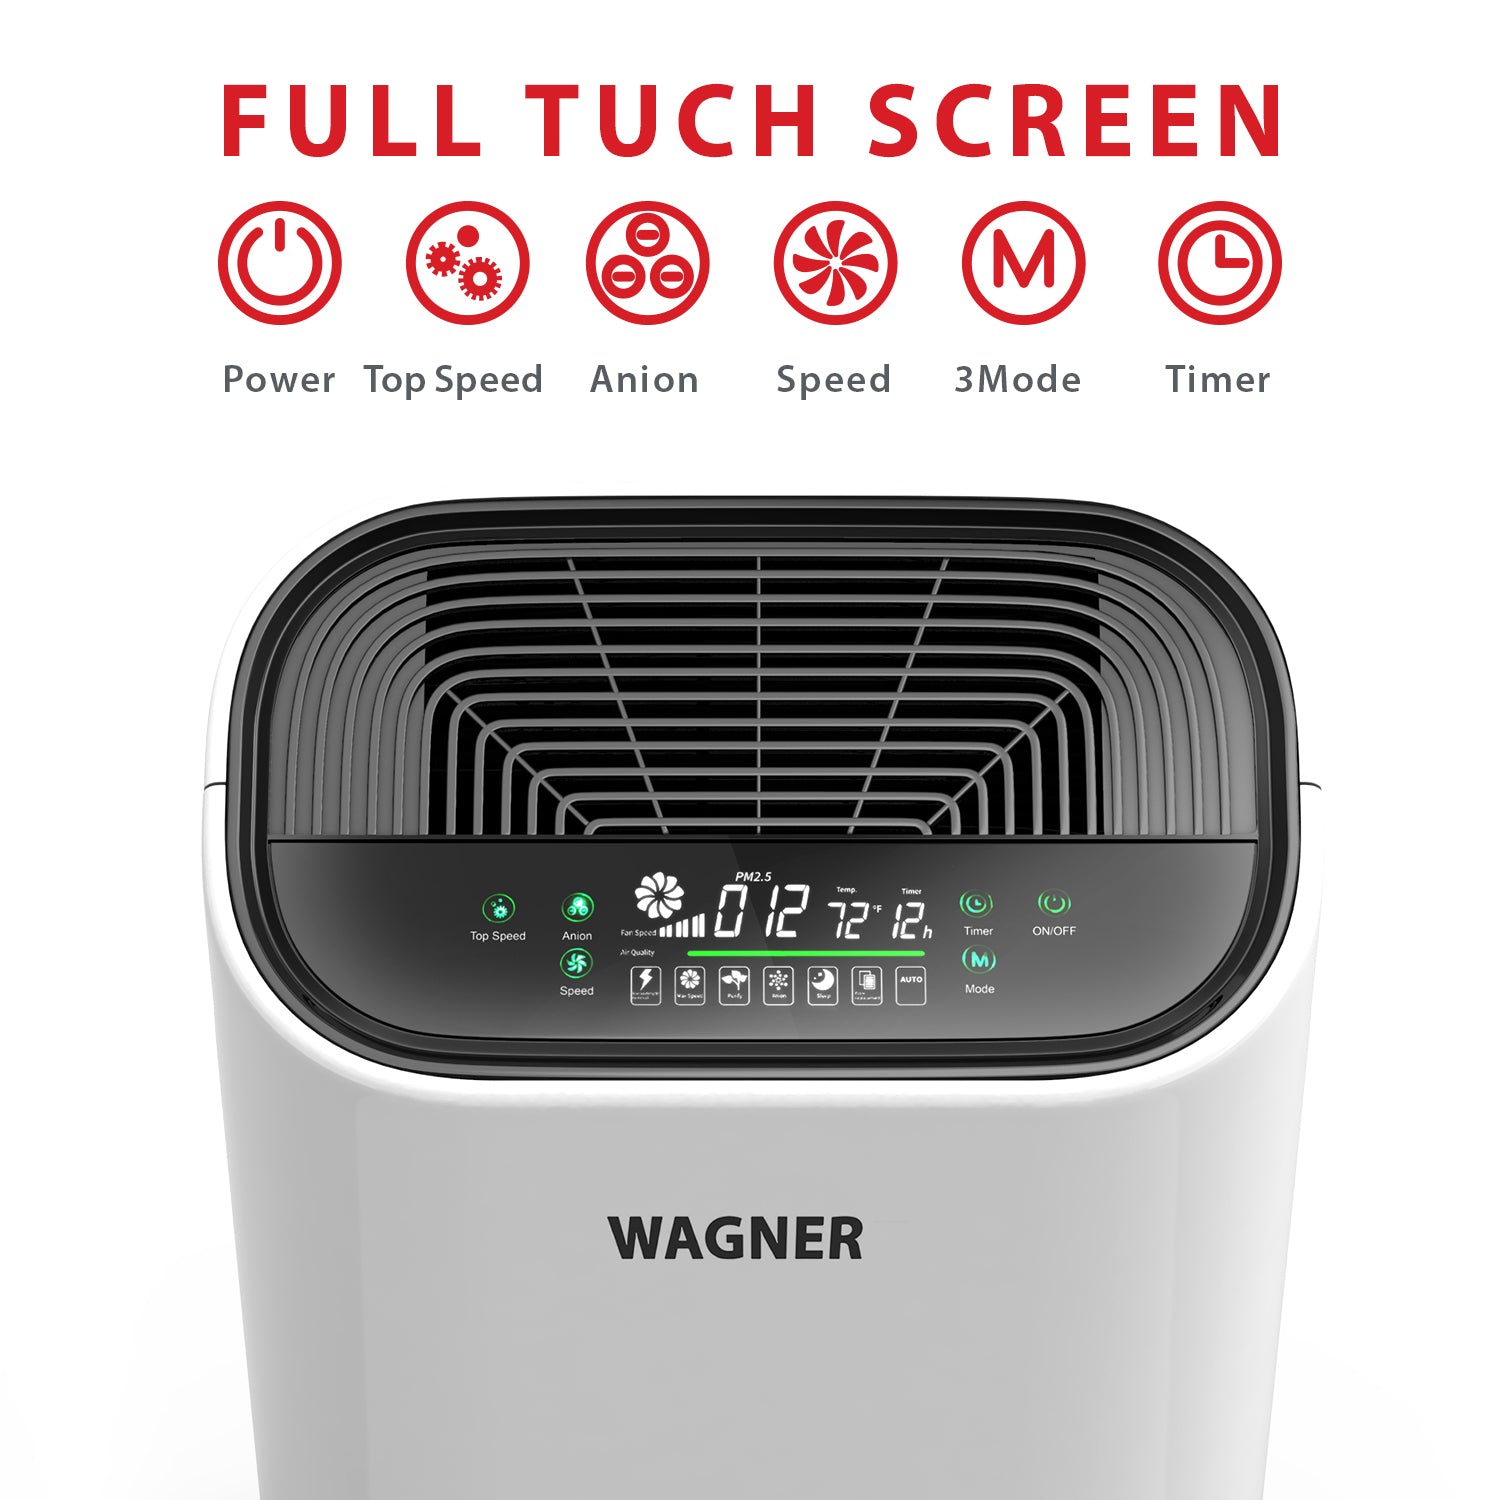 Wagner & Stern air purifier WA888 ozone free, HEPA-13 medical grade filter for large rooms. Removes air particles, dust, odors, smoke, VOC, pollen pet dander, etc. (white)